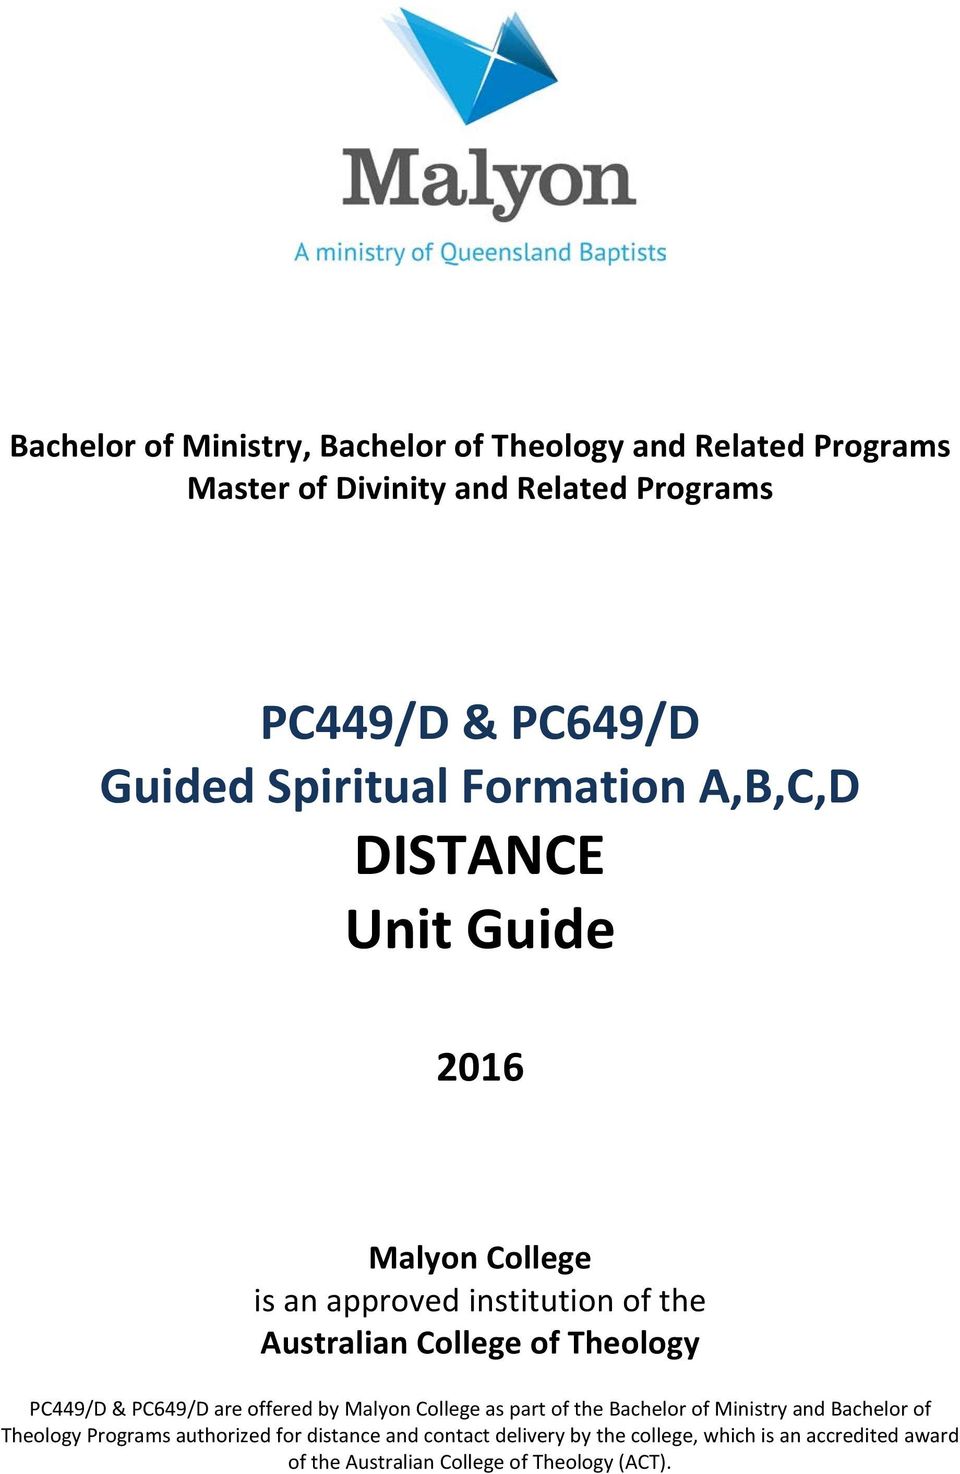 Theology PC449/D & PC649/D are offered by Malyon College as part of the Bachelor of Ministry and Bachelor of Theology Programs